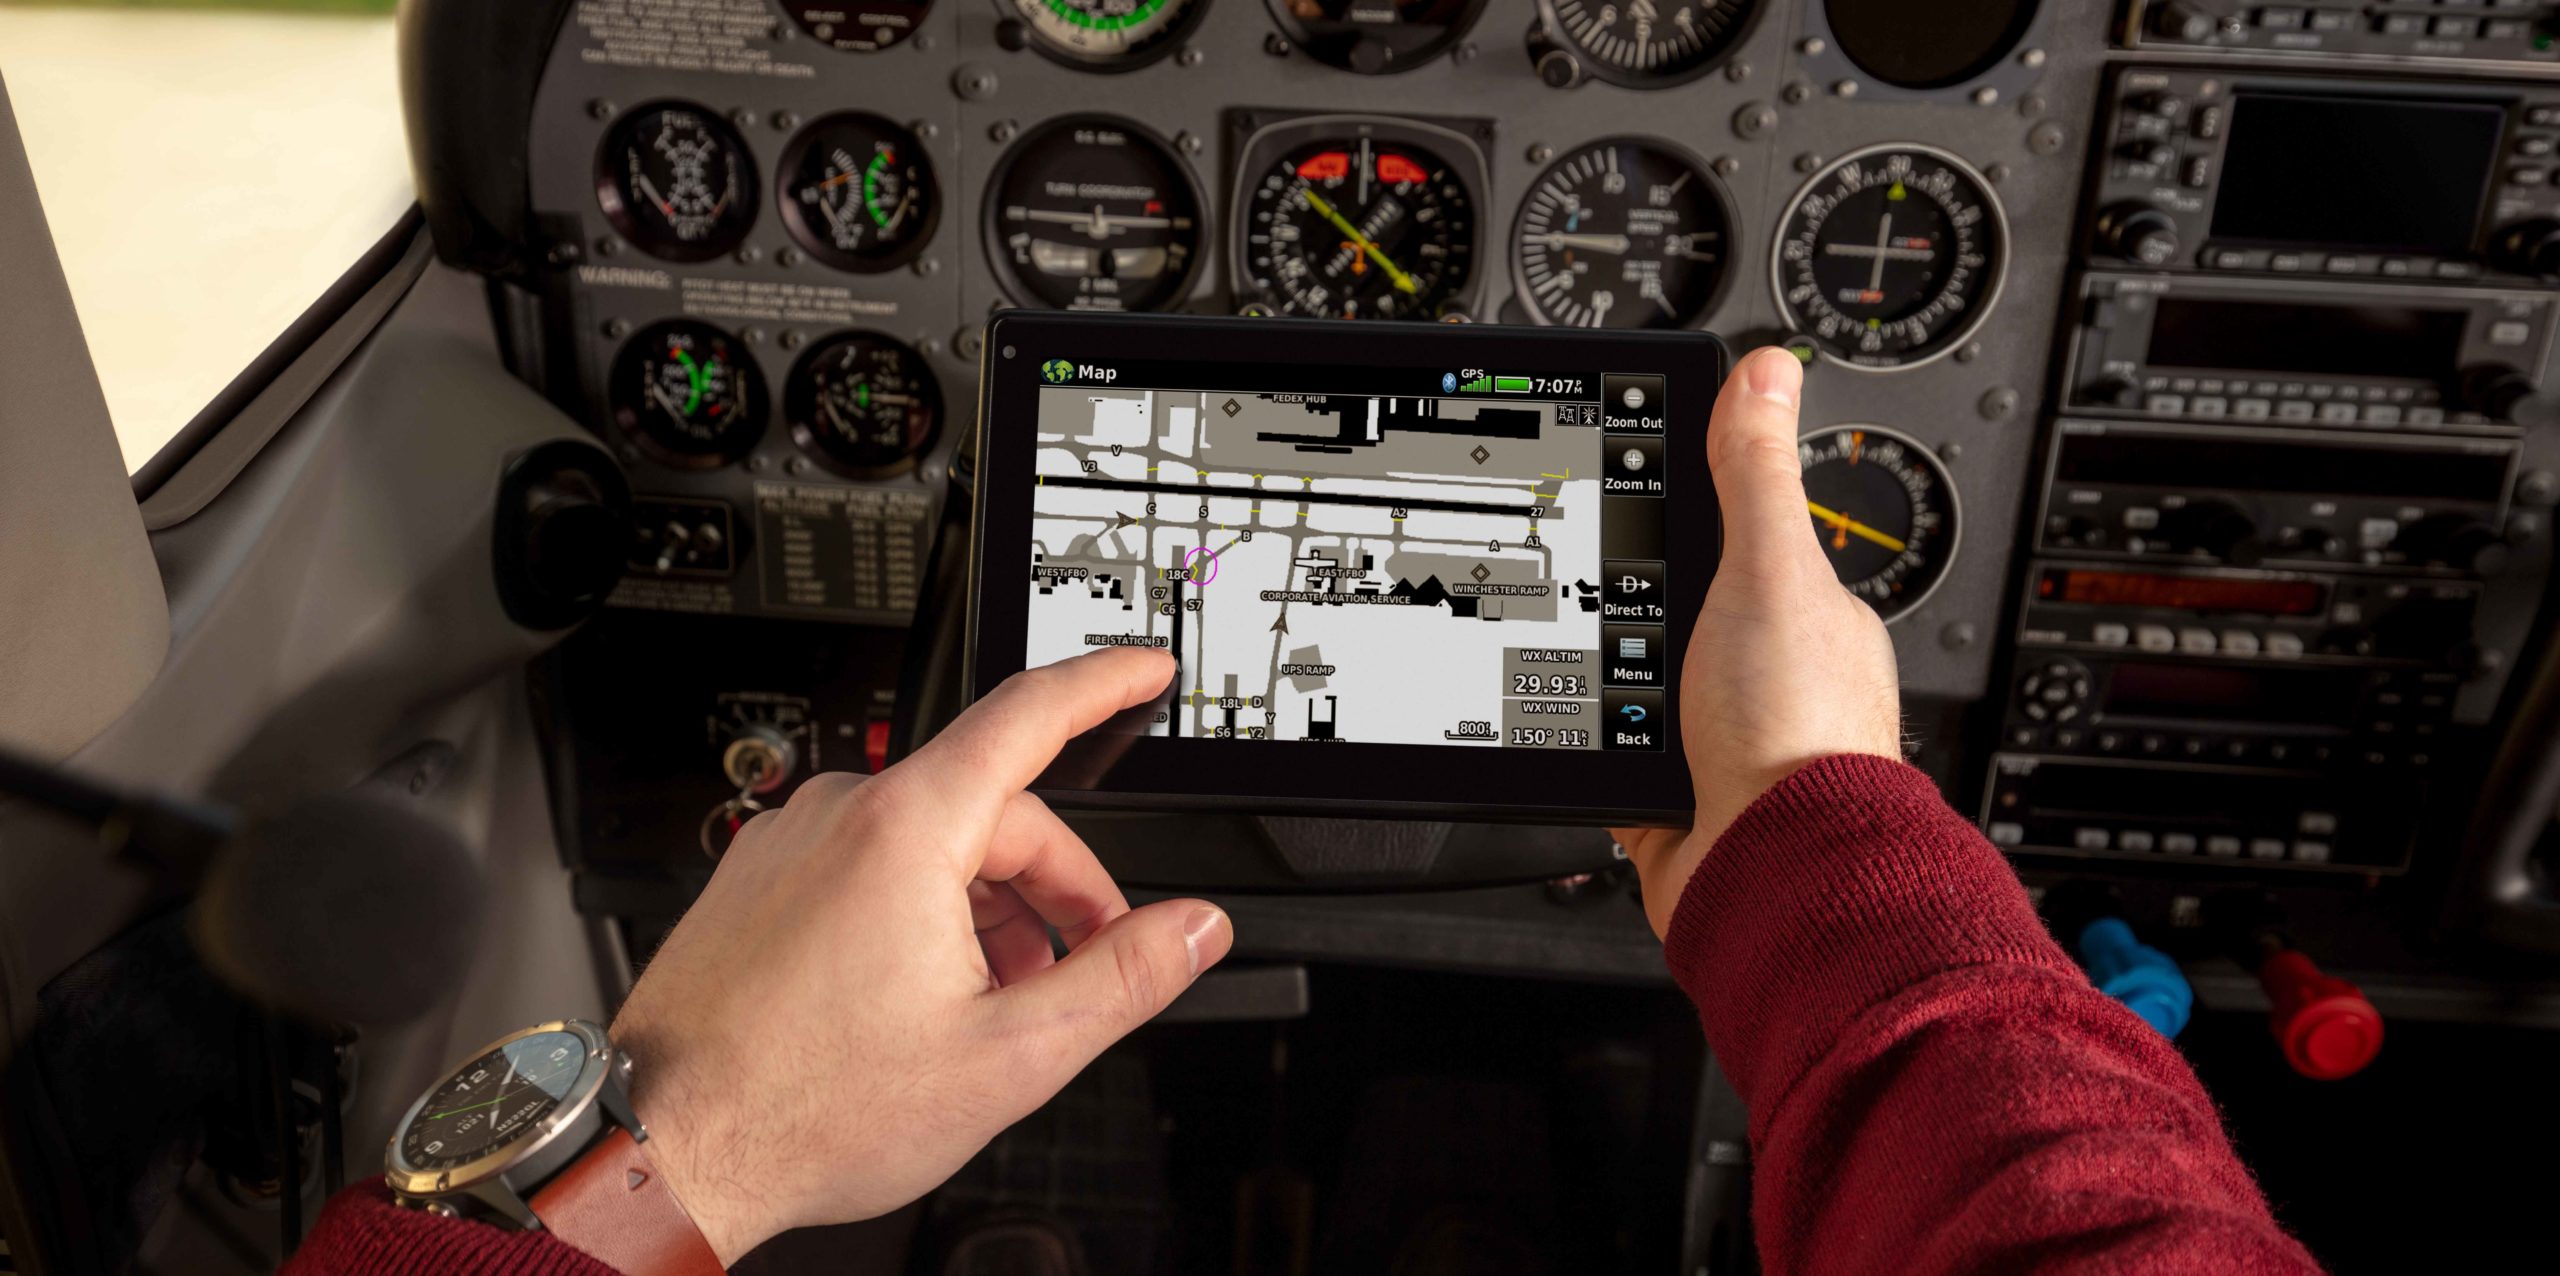 aera 760 portable in pilot's hands in airplane cockpit, showing SafeTaxi feature